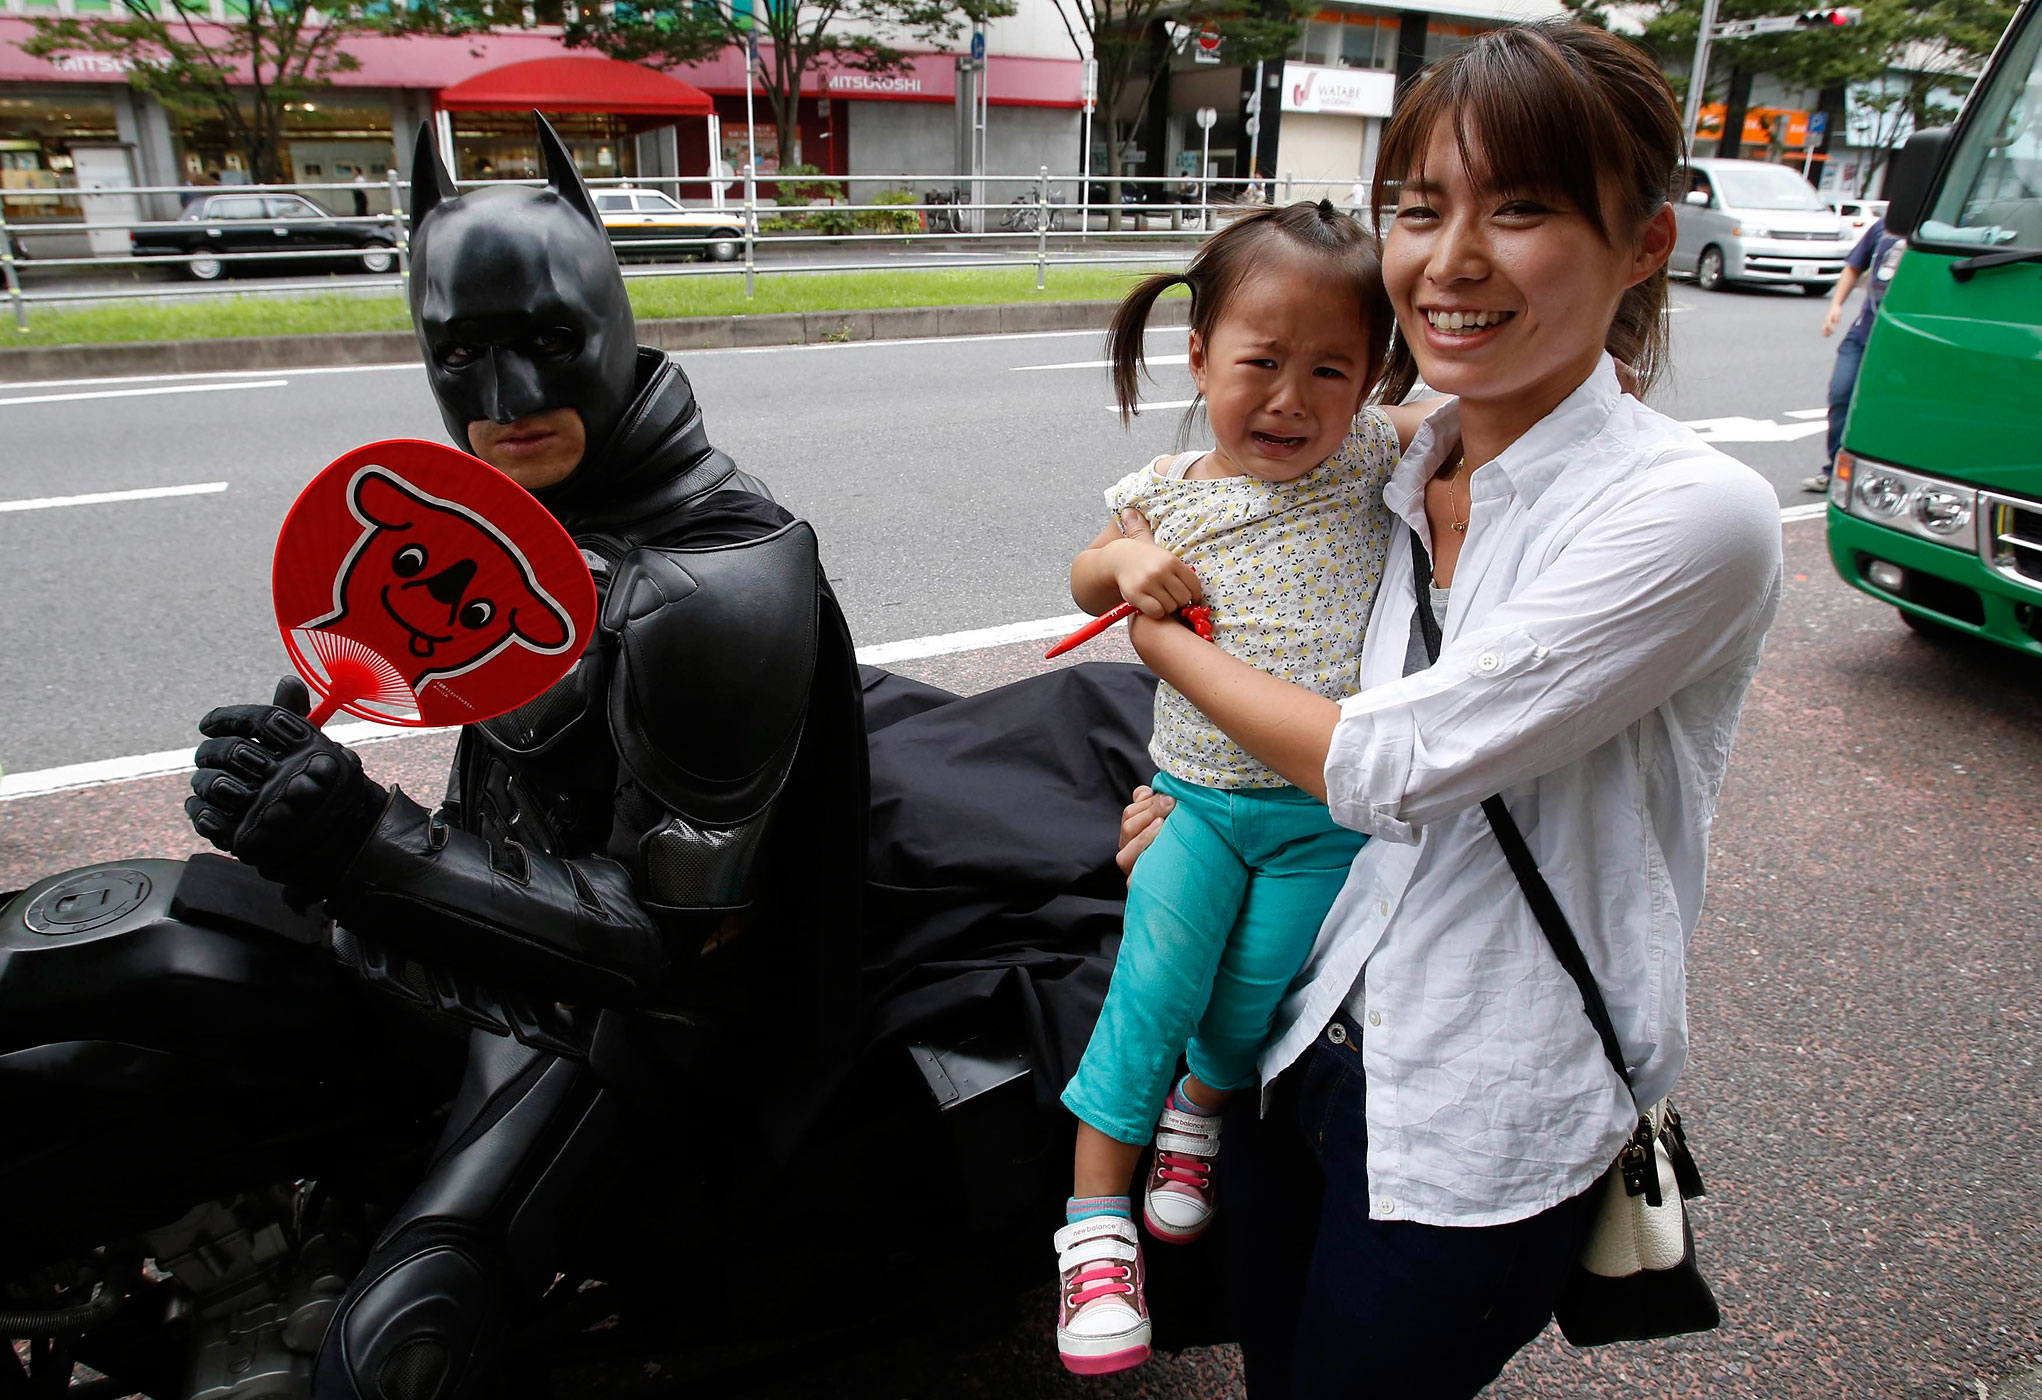 A woman carrying a crying child poses for pictures next to a 41-year-old man going by the name of Chibatman sitting on his "Chibatpod" in Chiba